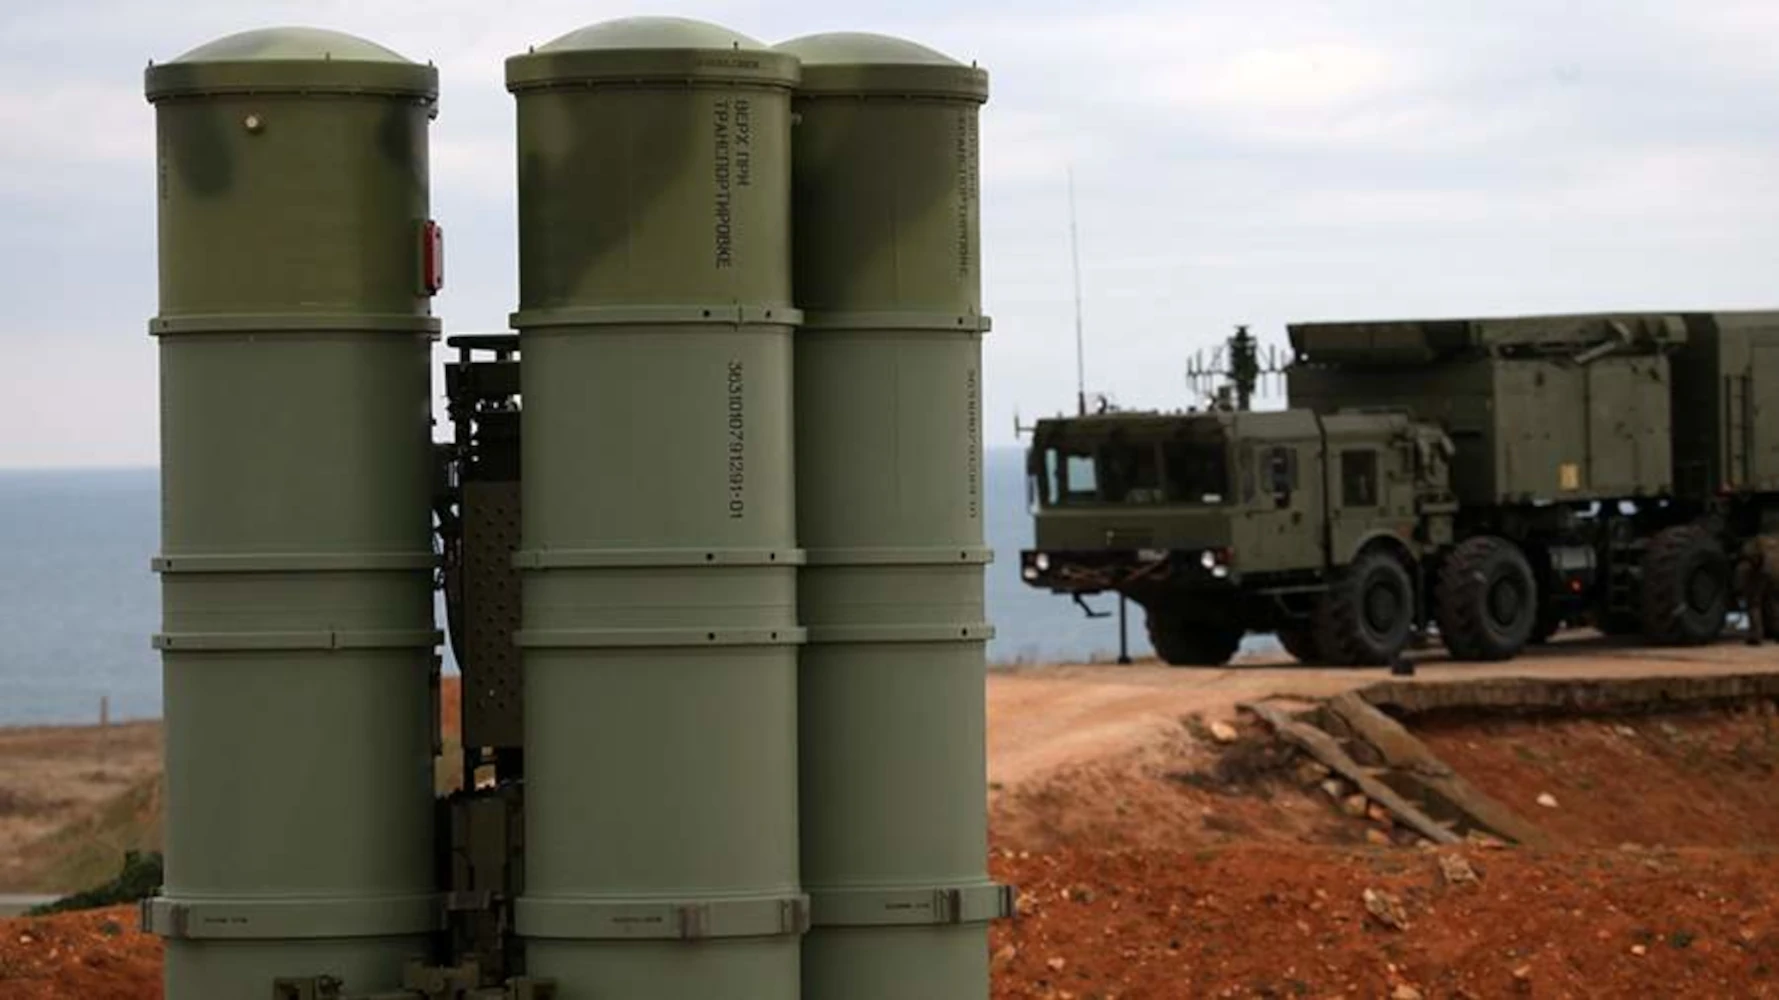 S-400 anti-aircraft missile system